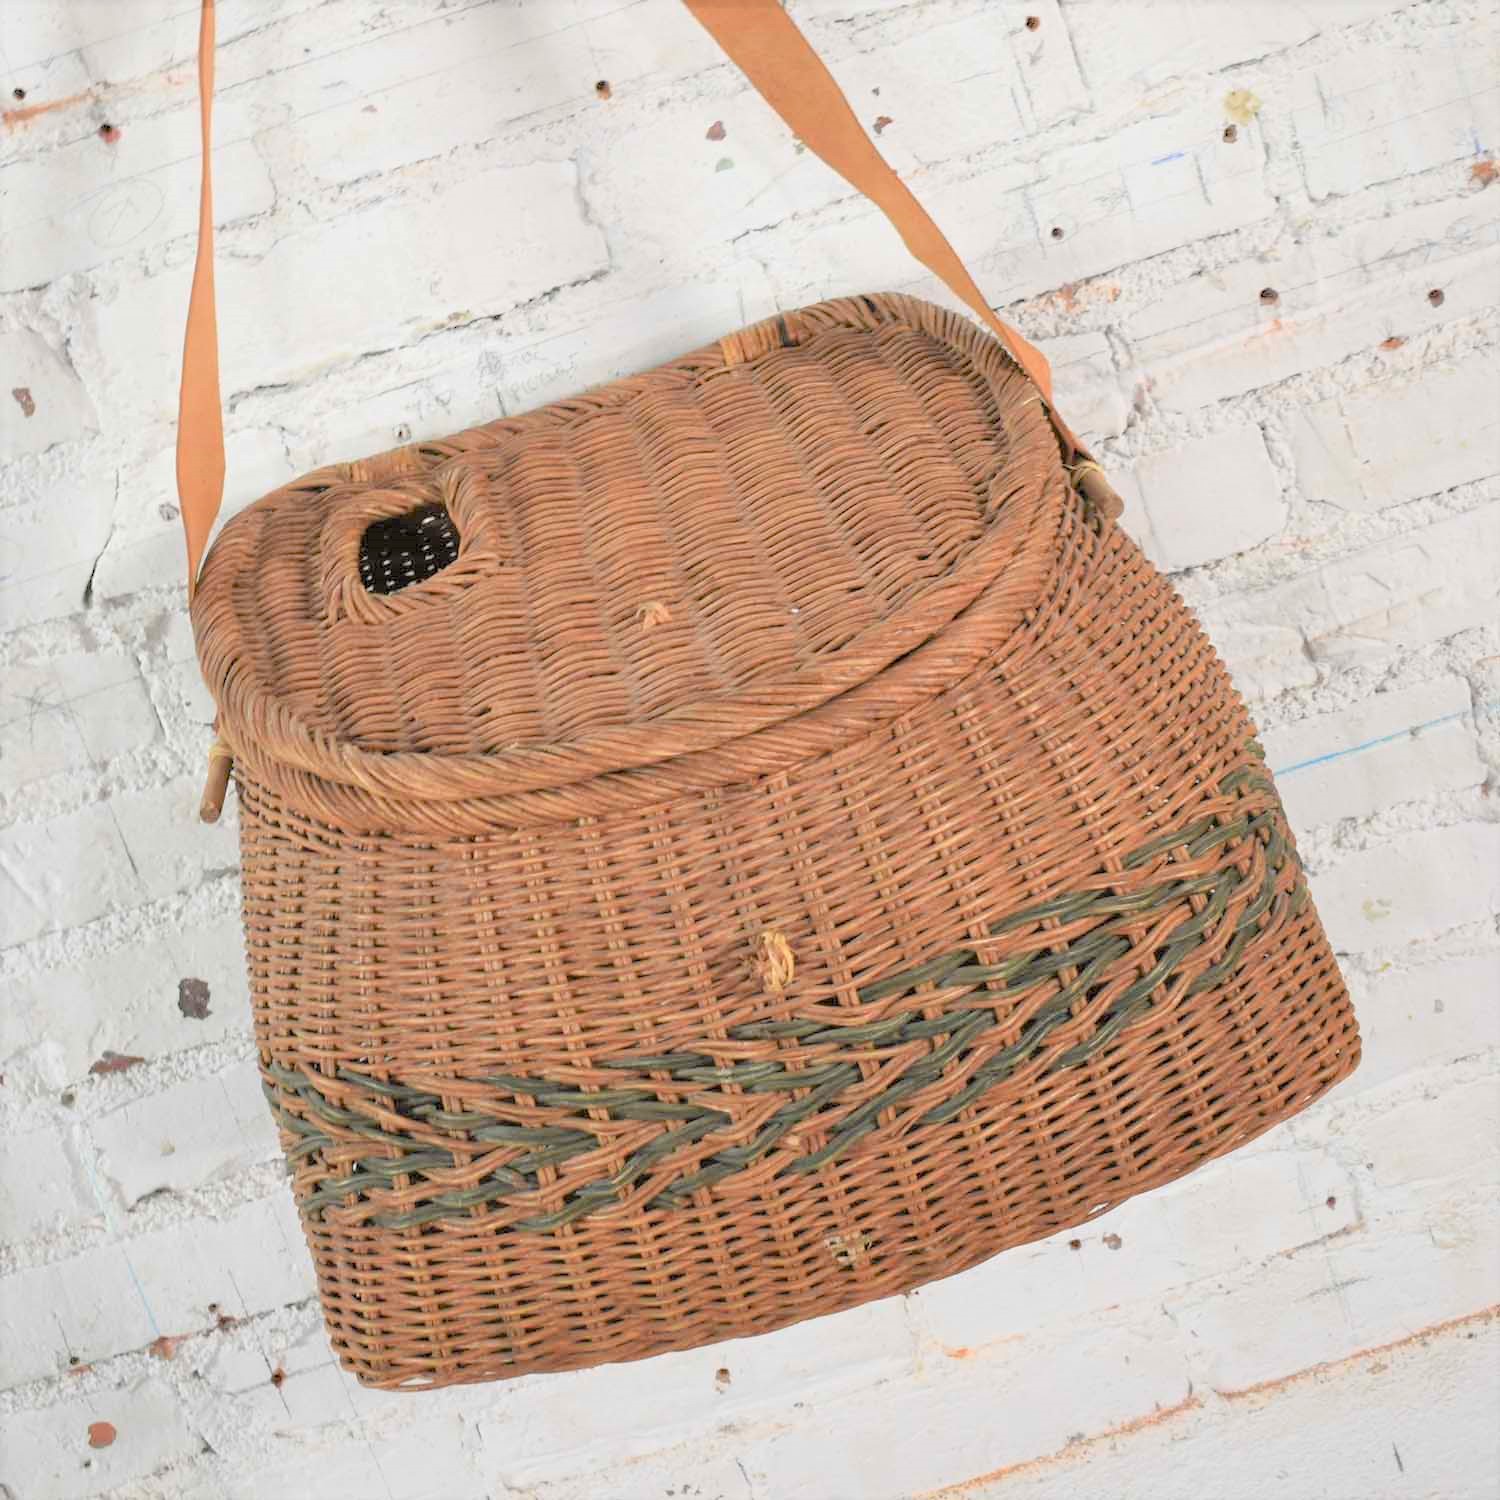 Antique Wicker Basket Fishing Creel with Leather Strap Handle